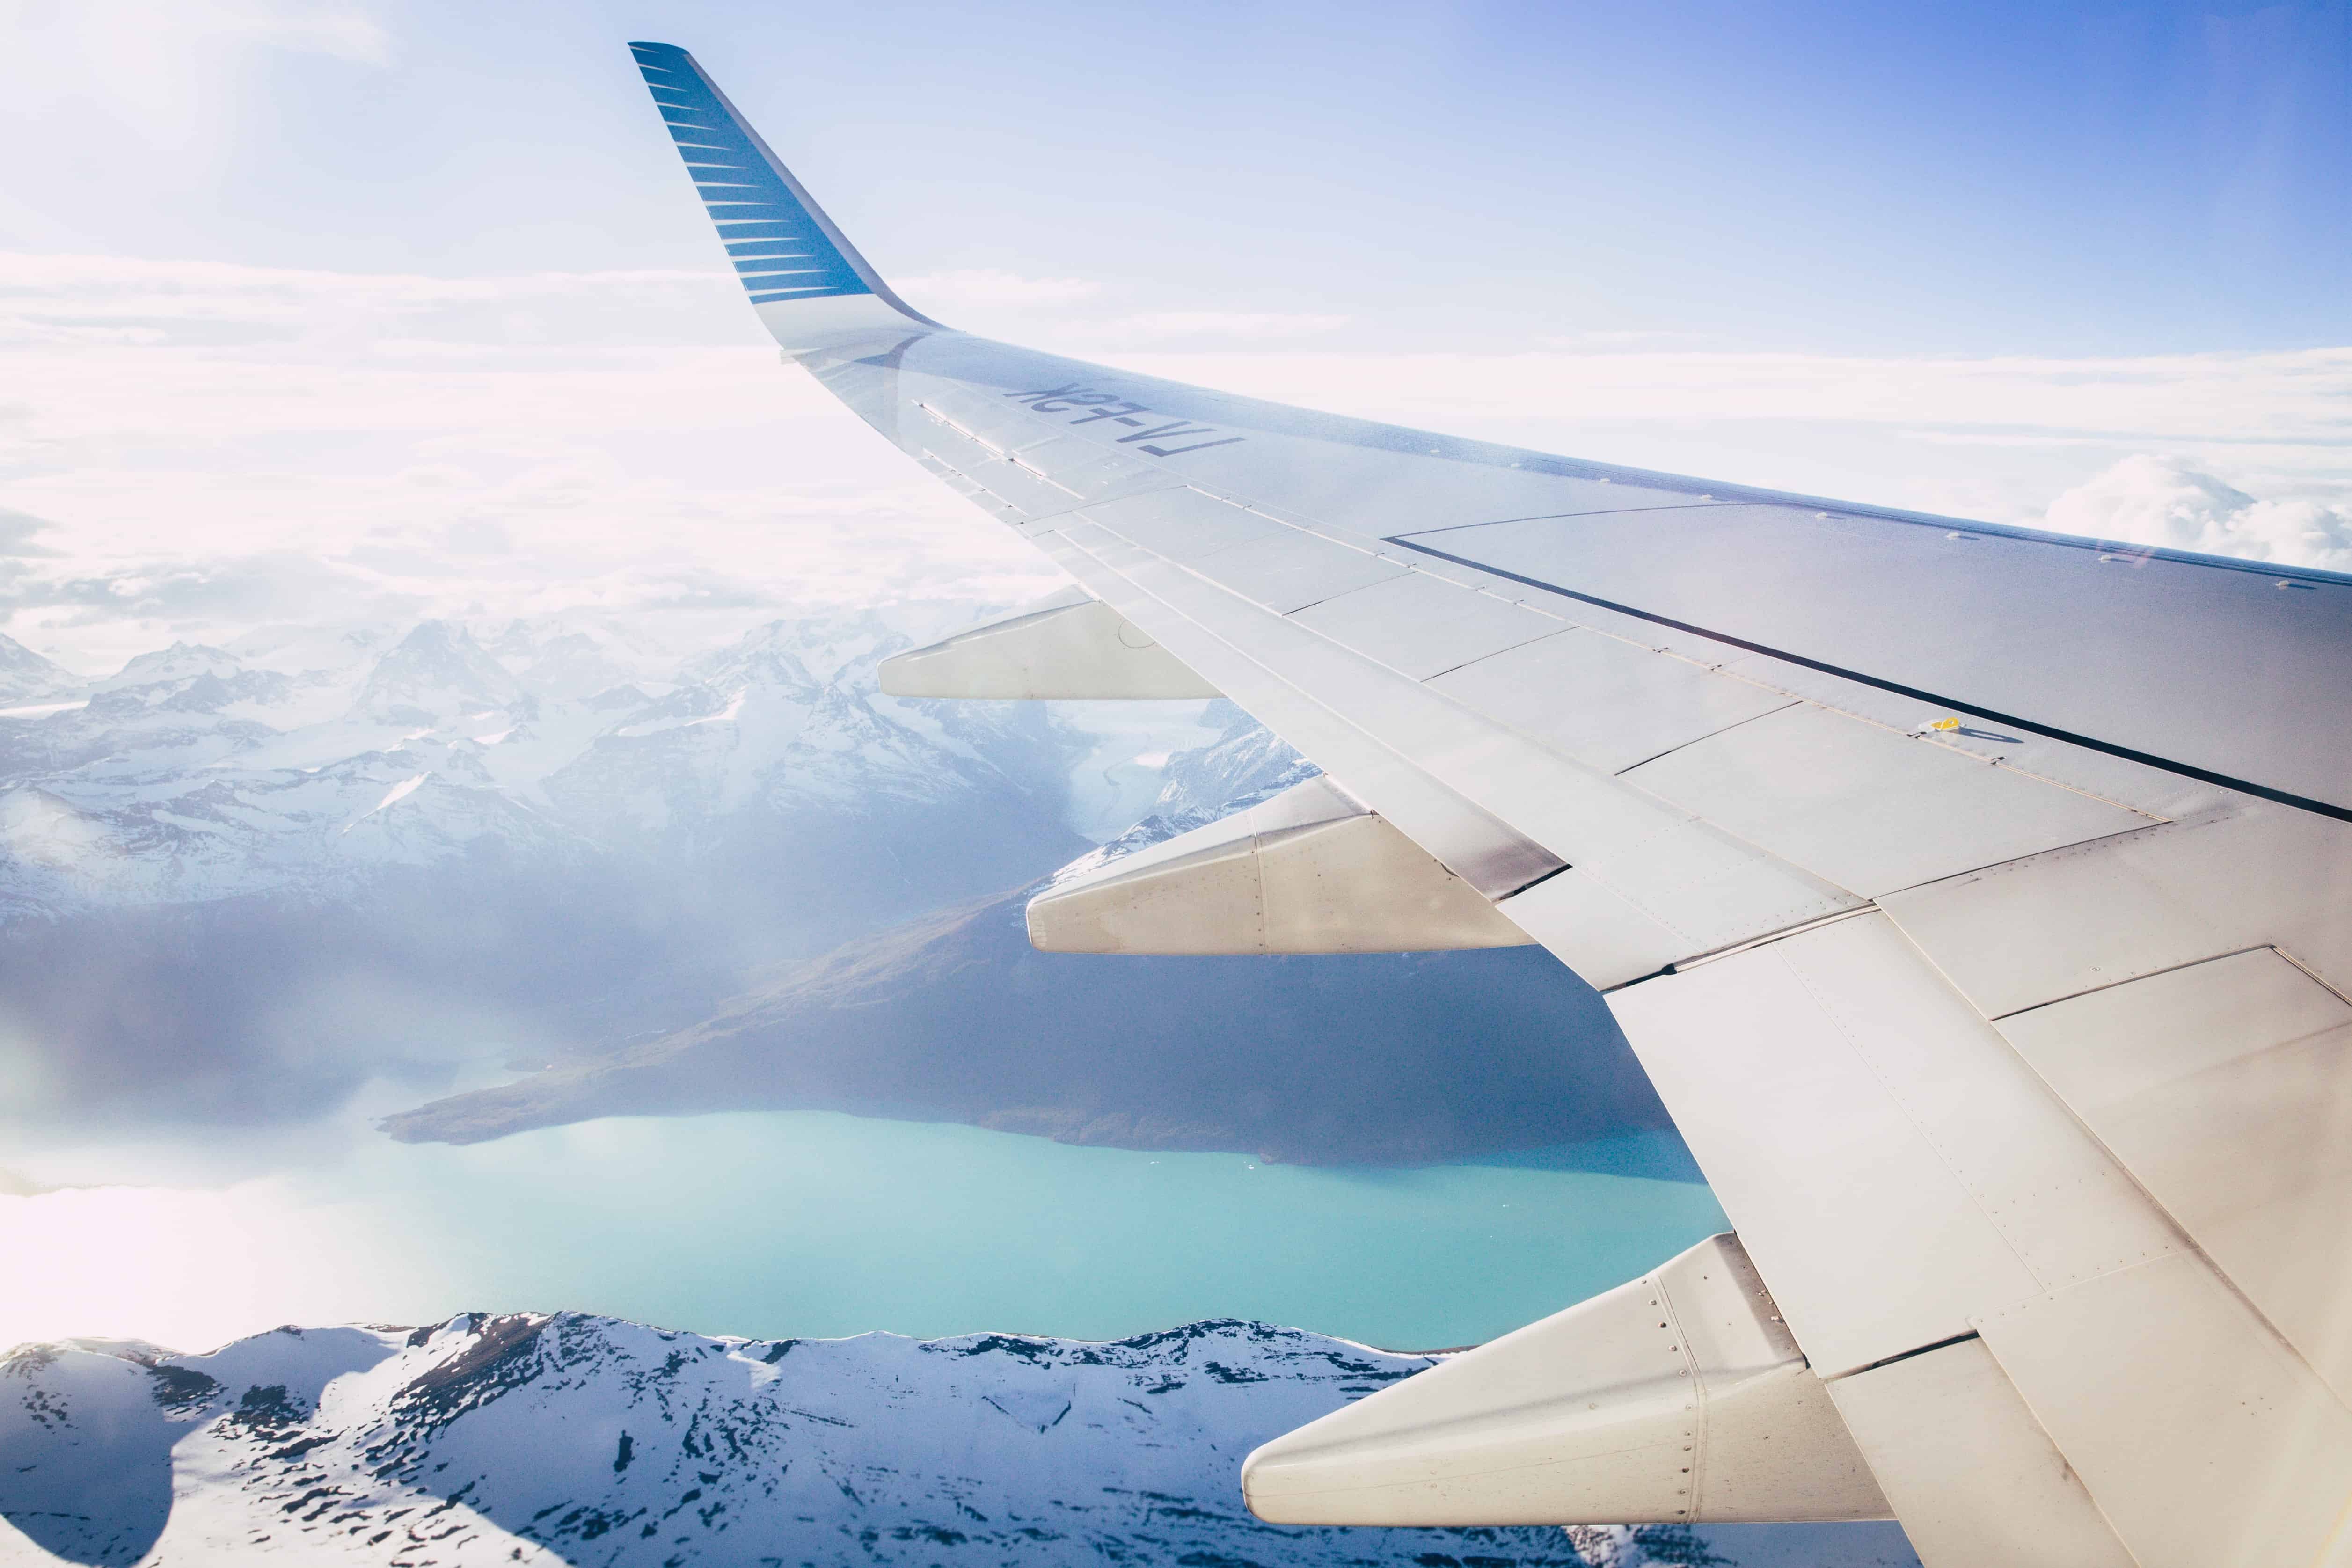 Fear of flying phobia is common. Learn how to overcome fear of flying so you don't let this interfere with your work or family any more. Adventures awaits! 